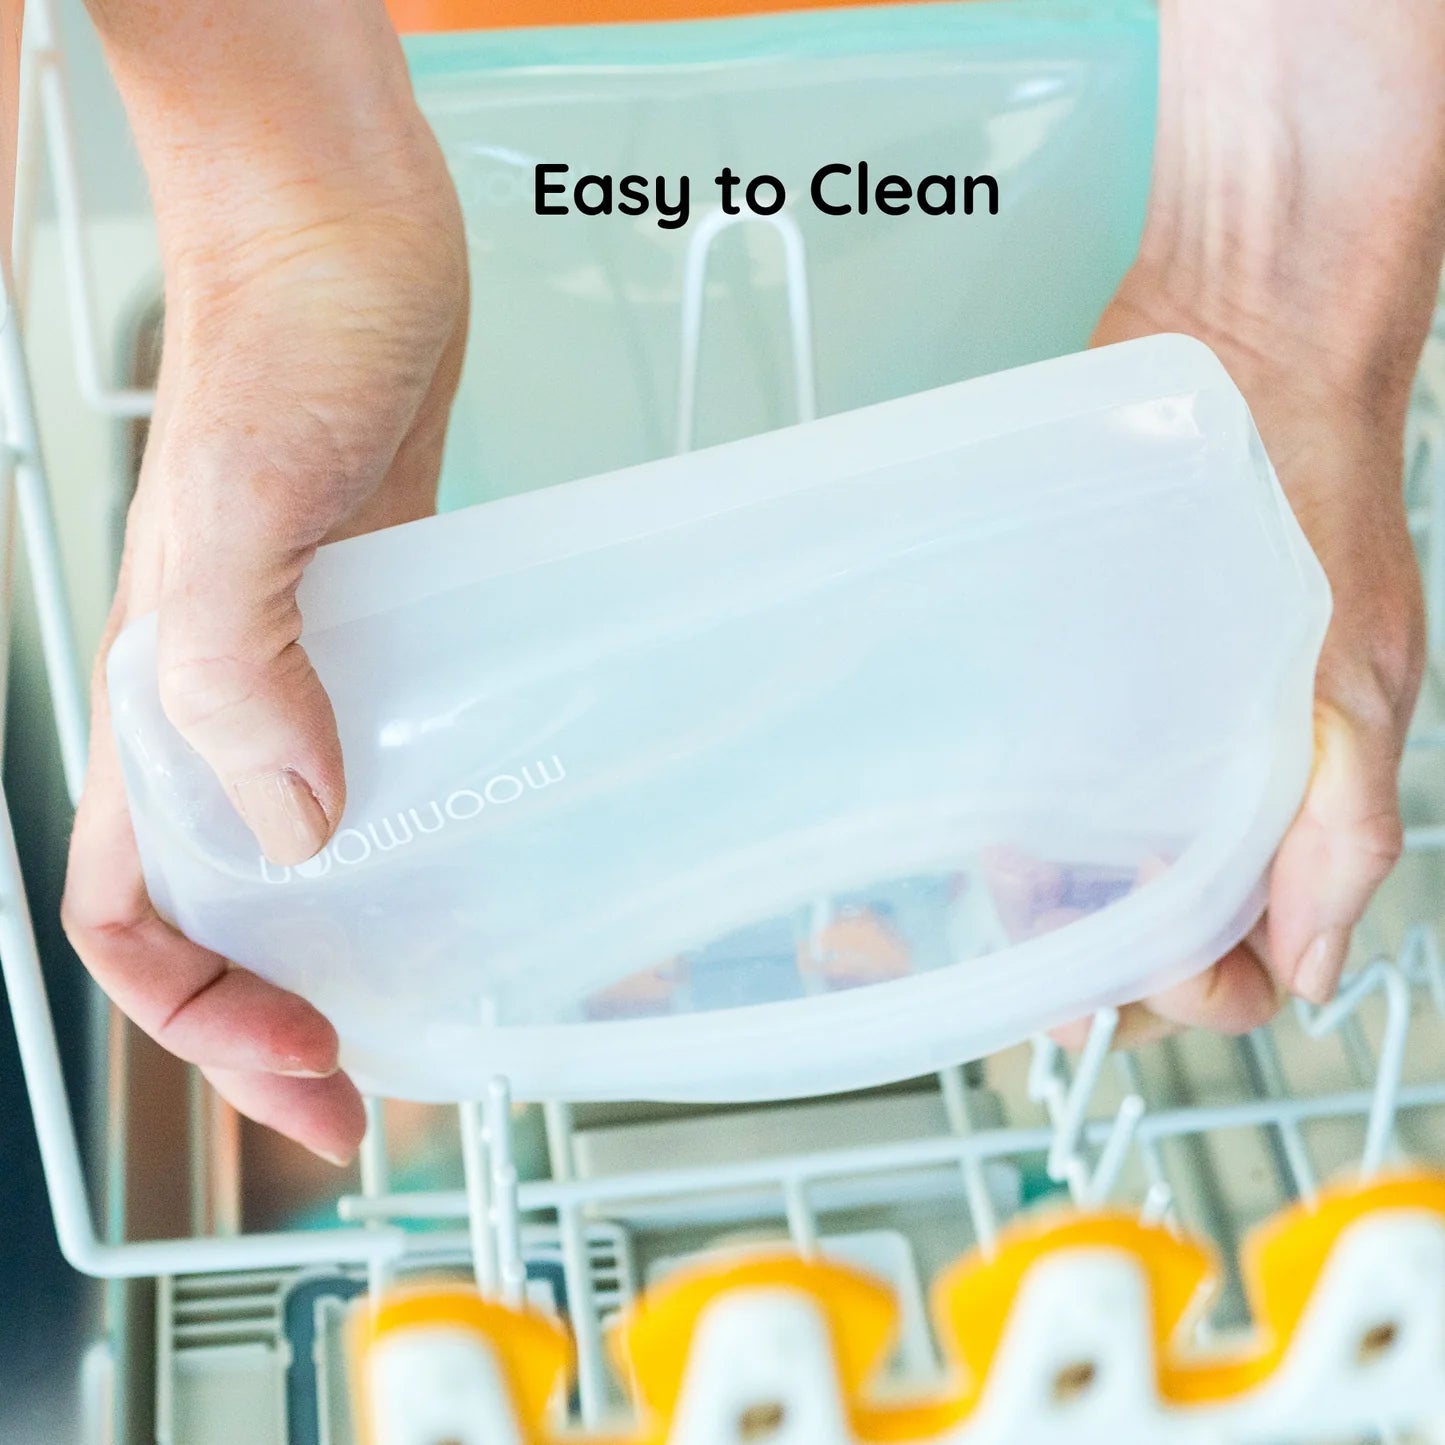 Reusable Silicone Food Bags | 2 Pack Small Clear Bags (330ml)